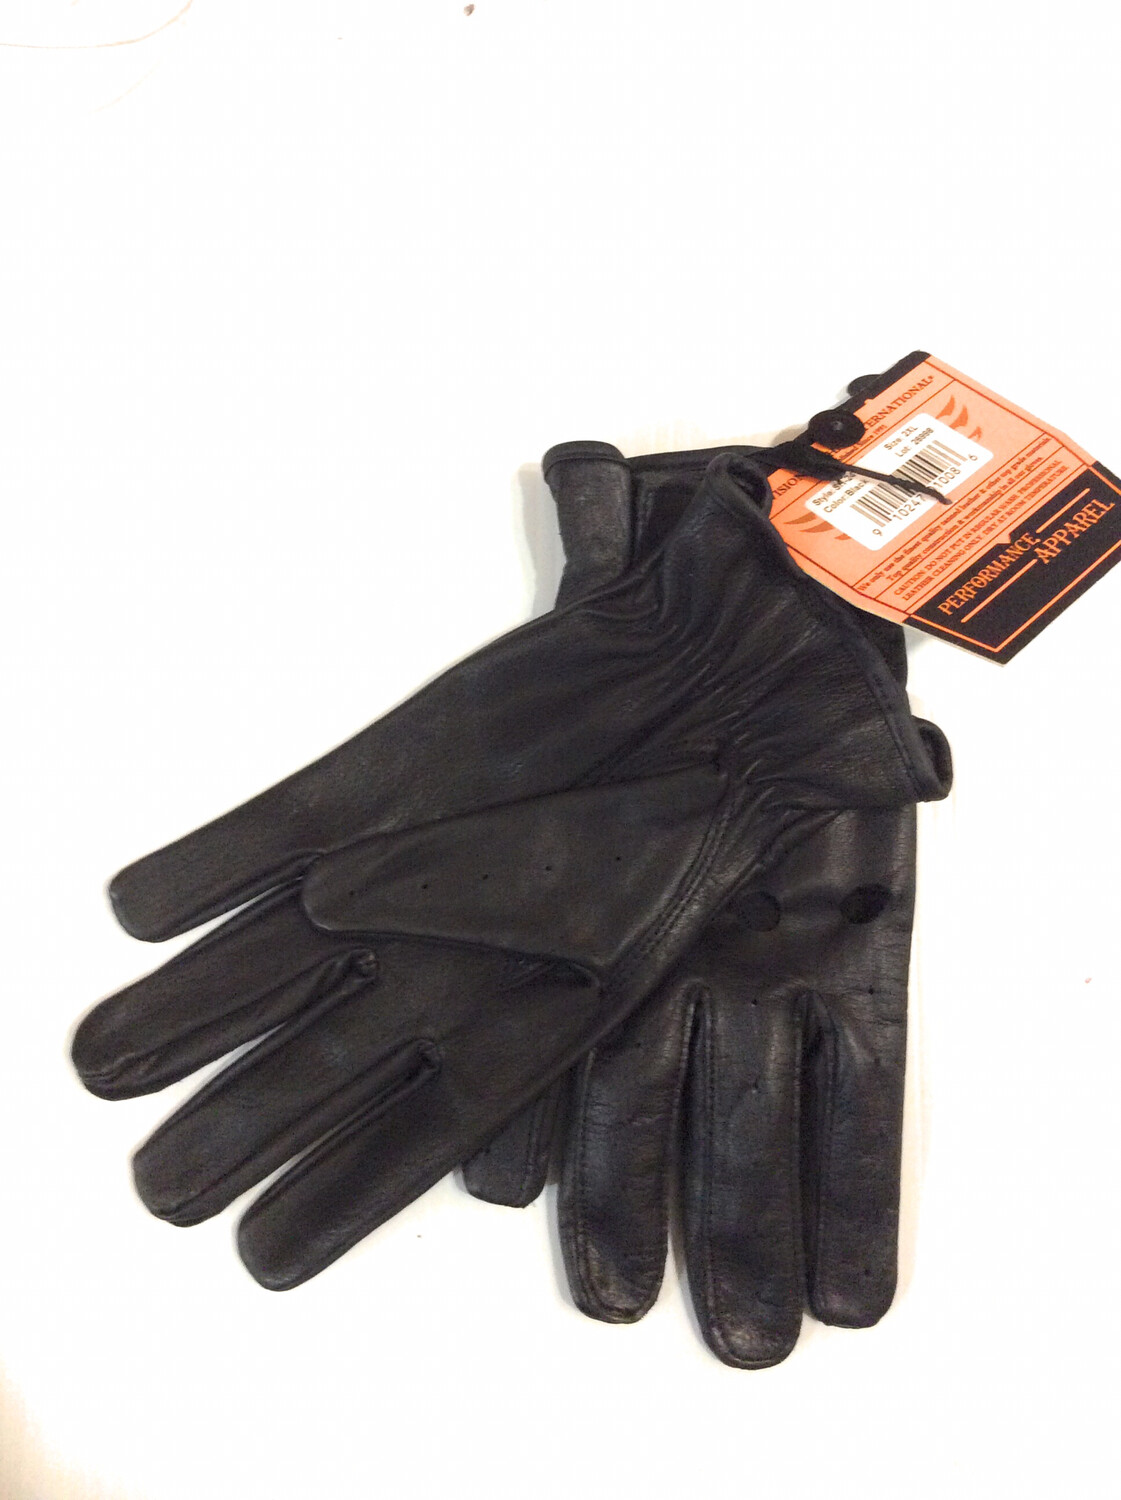 Men driver gloves real leather size m to 5xl